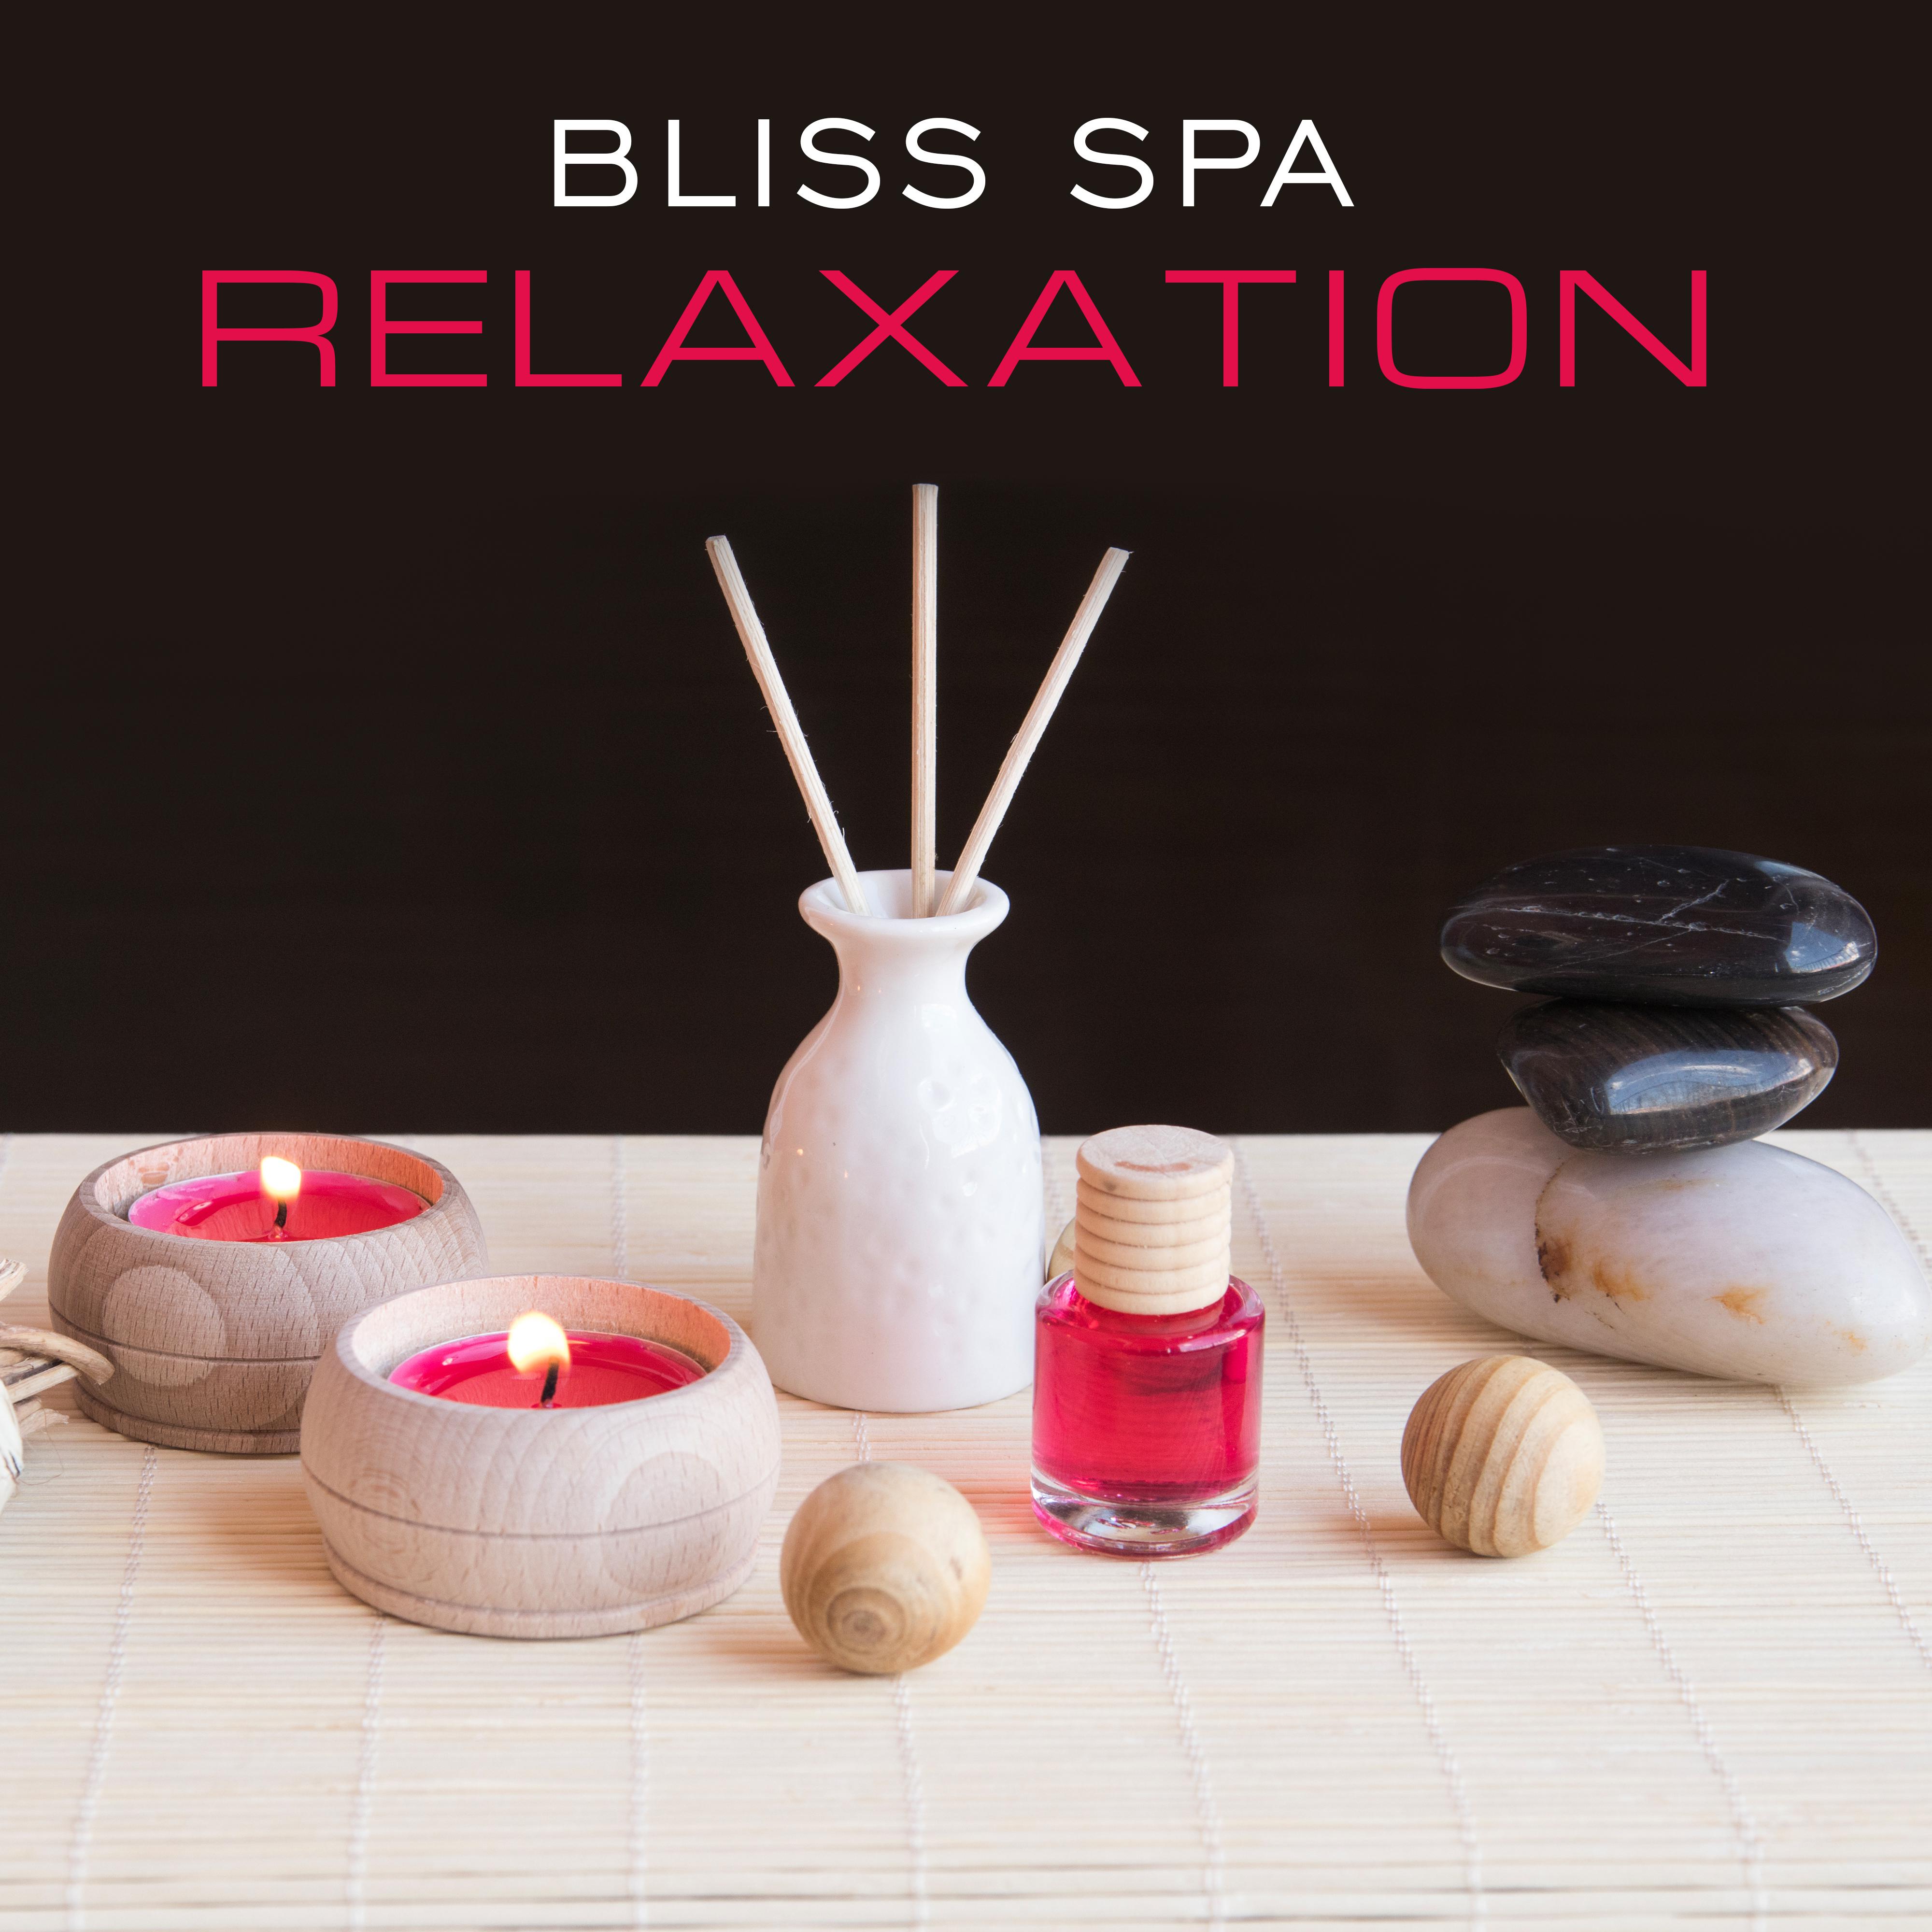 Bliss Spa Relaxation